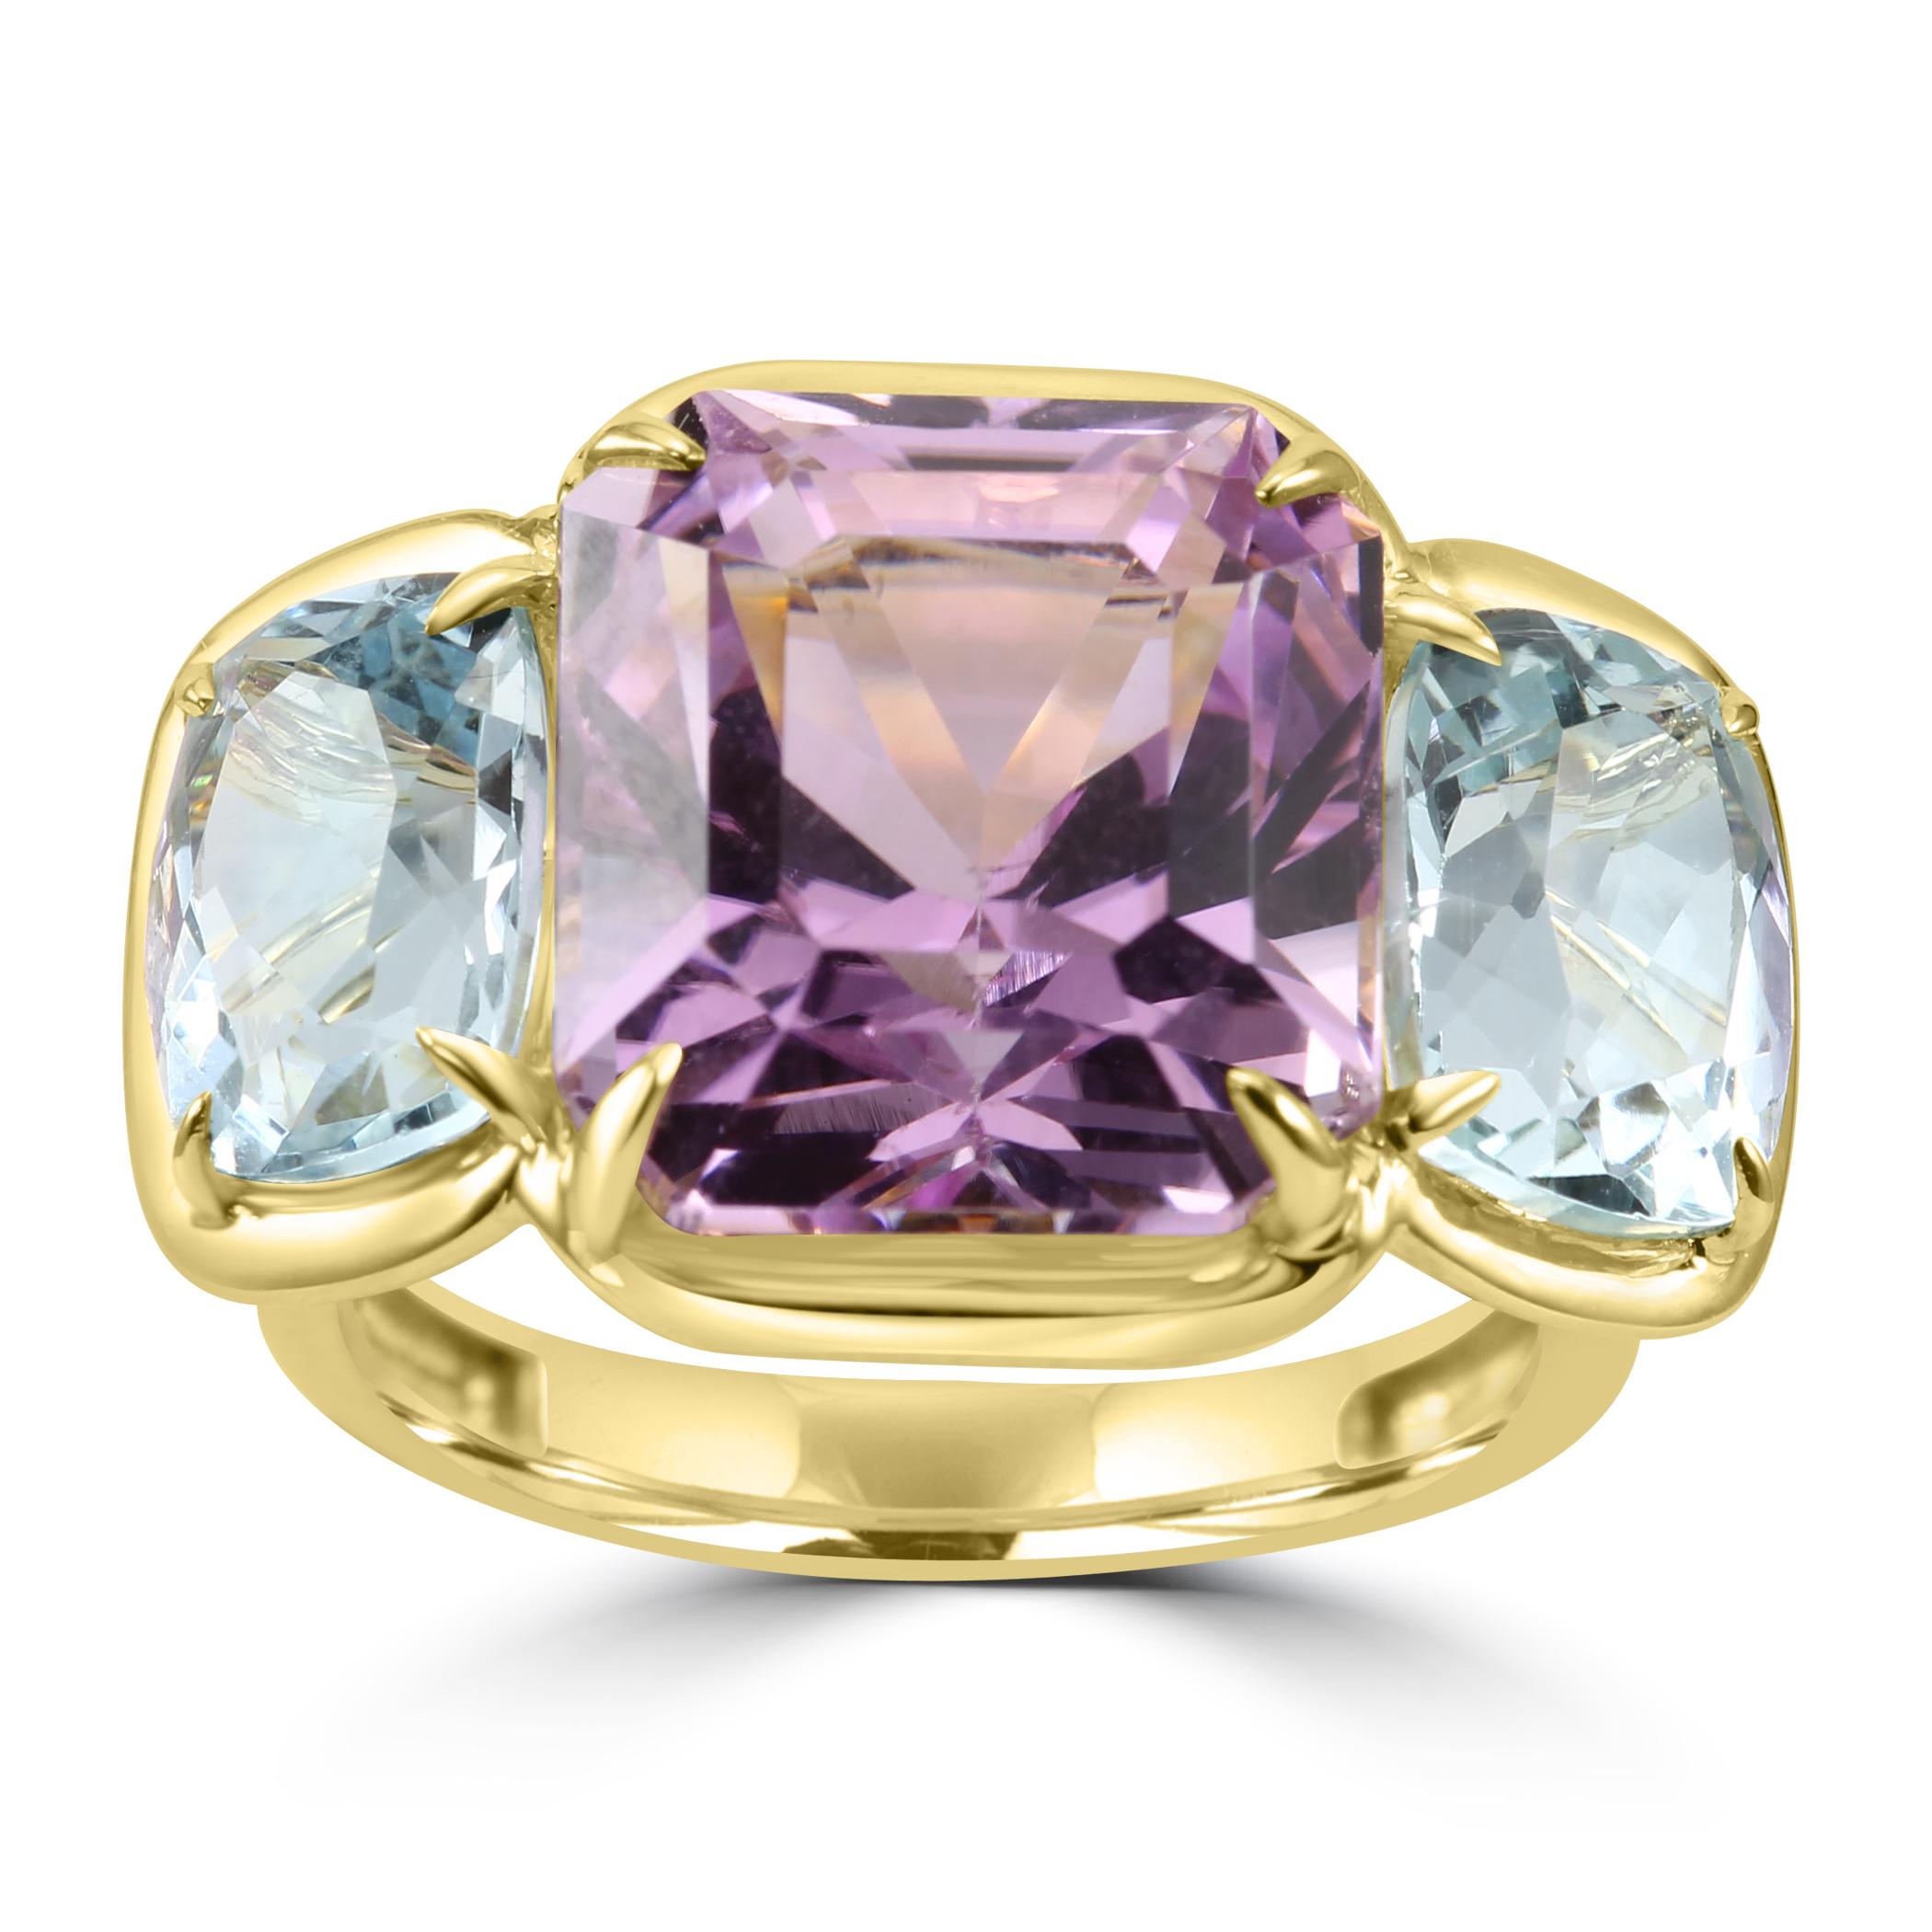 At the heart of this ring is a magnificent Kunzite Emerald Cut Center, boasting an impressive 11.45 carats. The soft purplish color of the Kunzite adds a touch of romance and femininity to the design, making it a standout feature.

Flanking the